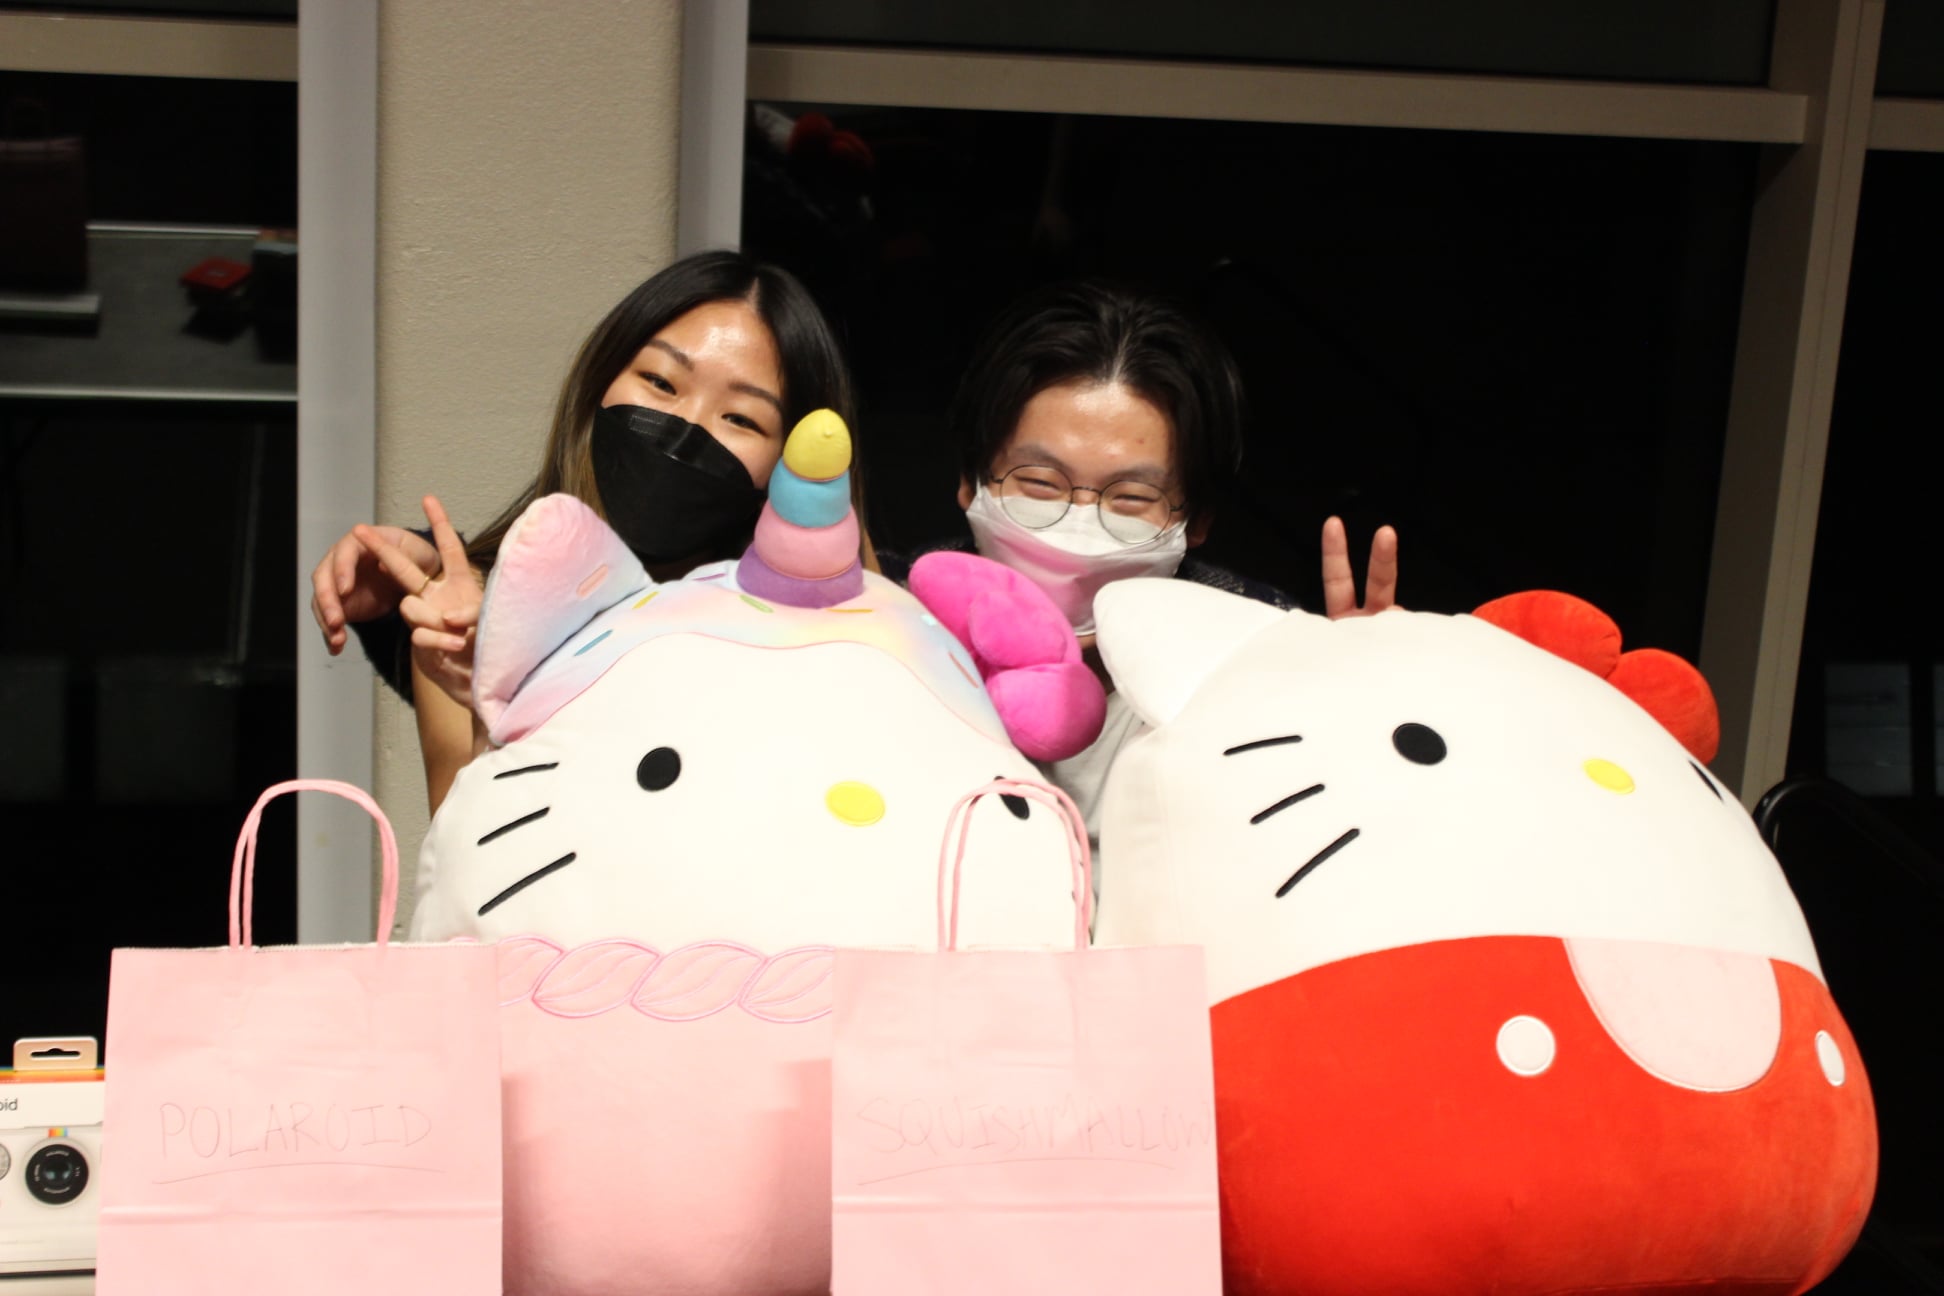 Two students smiling behind two large Hello Kitty figures.